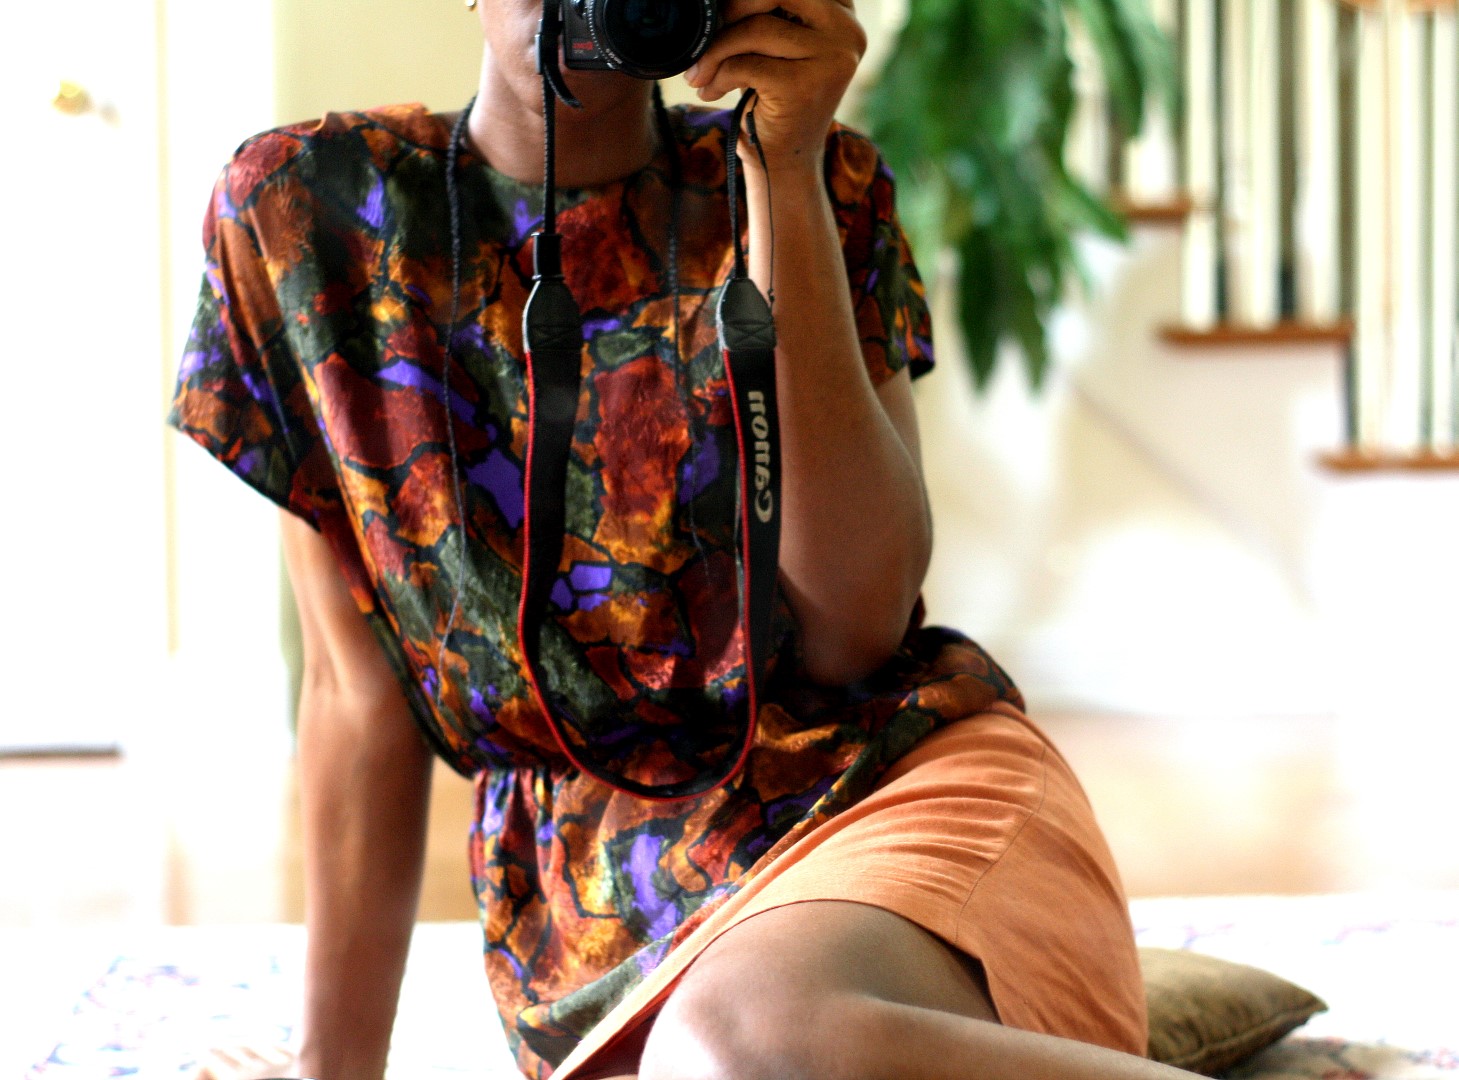 Going back to the basics - Nigerian fashion blogger Cassie Daves wearing a bright colored prints top